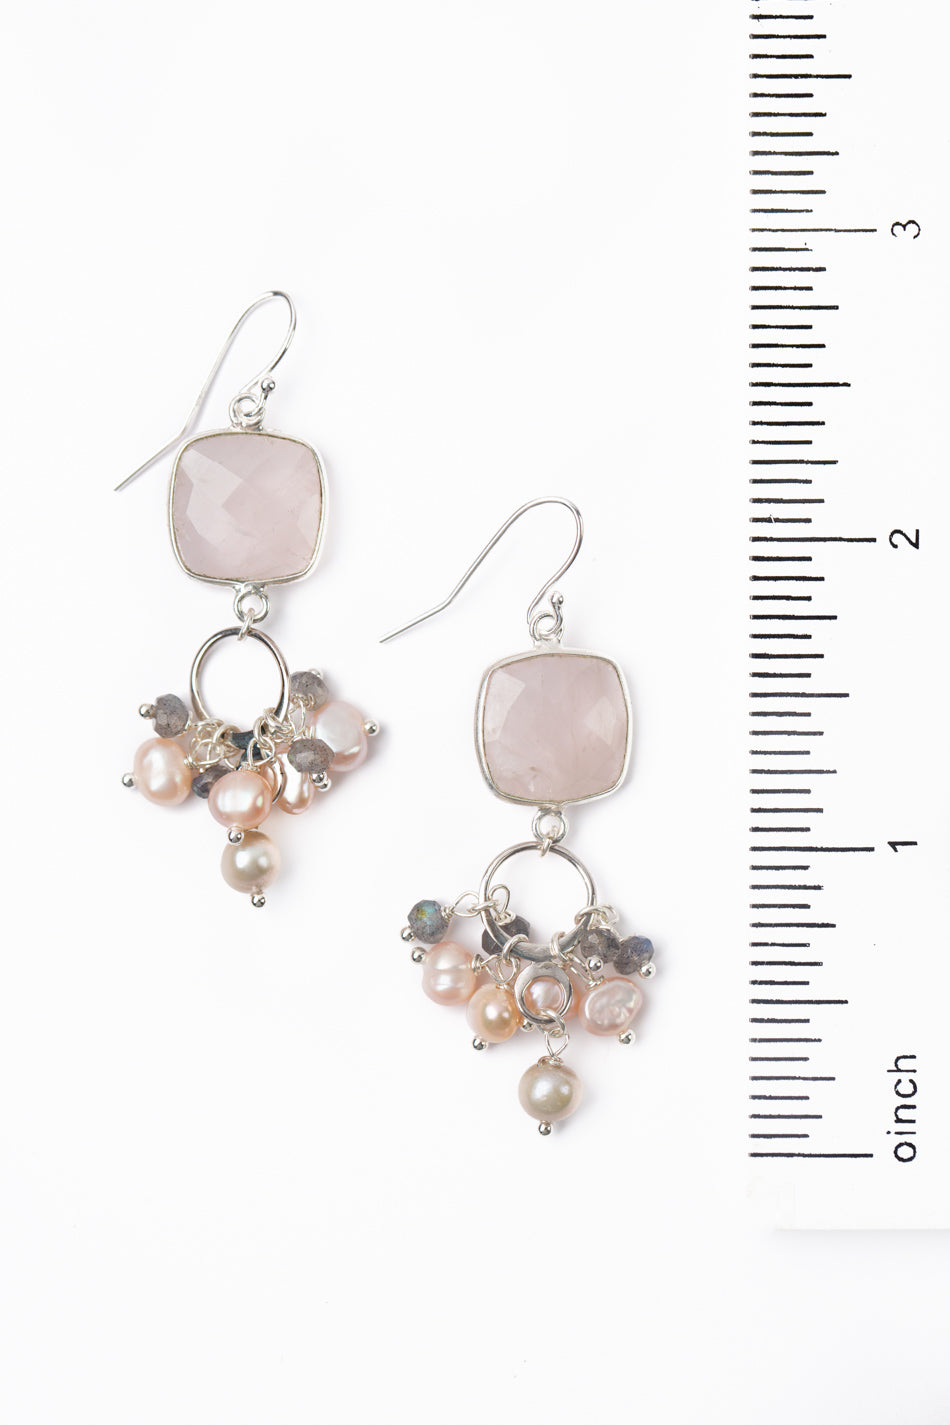 One Of A Kind Freshwater Pearl, Labradorite With Faceted Rose Quartz Statement Earrings